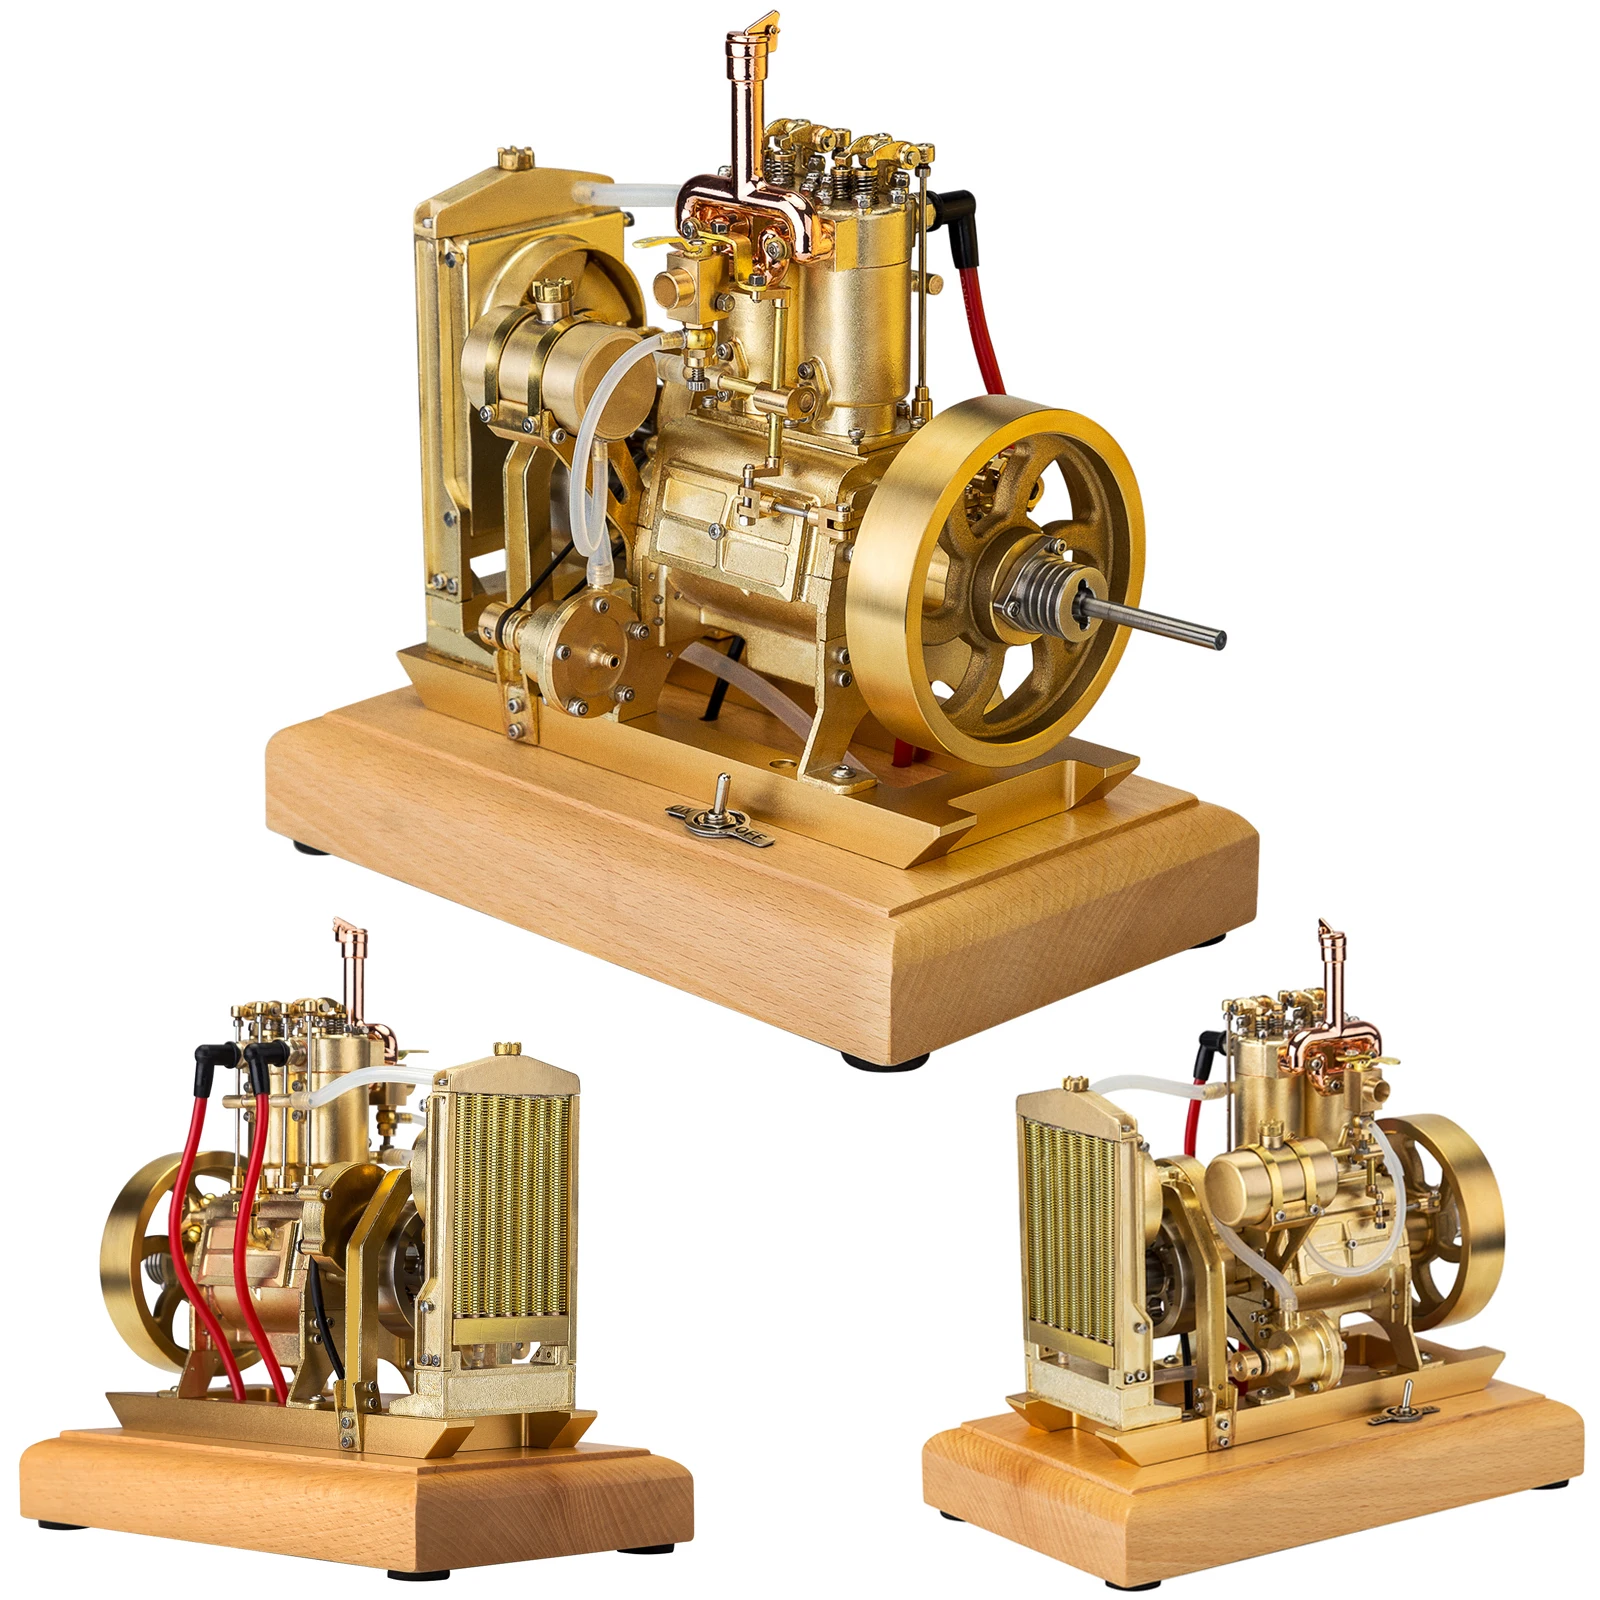 

5CC Vertical Twin-cylinder 4-stroke Water-cooled Gasoline Engine Internal Combustion Engine Model with Governor Educational Toys